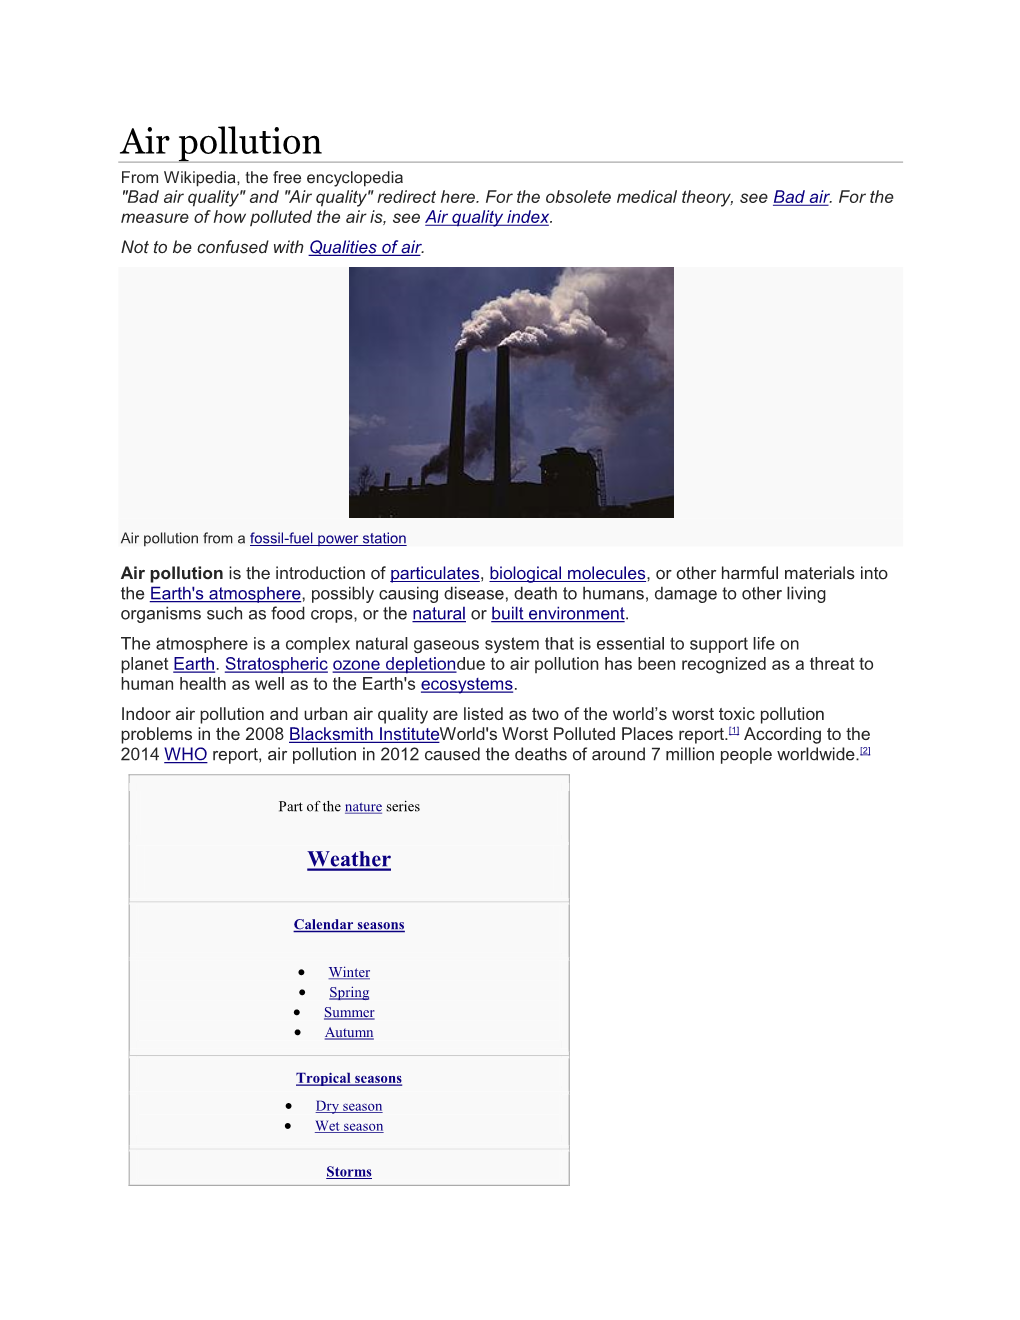 Air Pollution from Wikipedia, the Free Encyclopedia "Bad Air Quality" and "Air Quality" Redirect Here